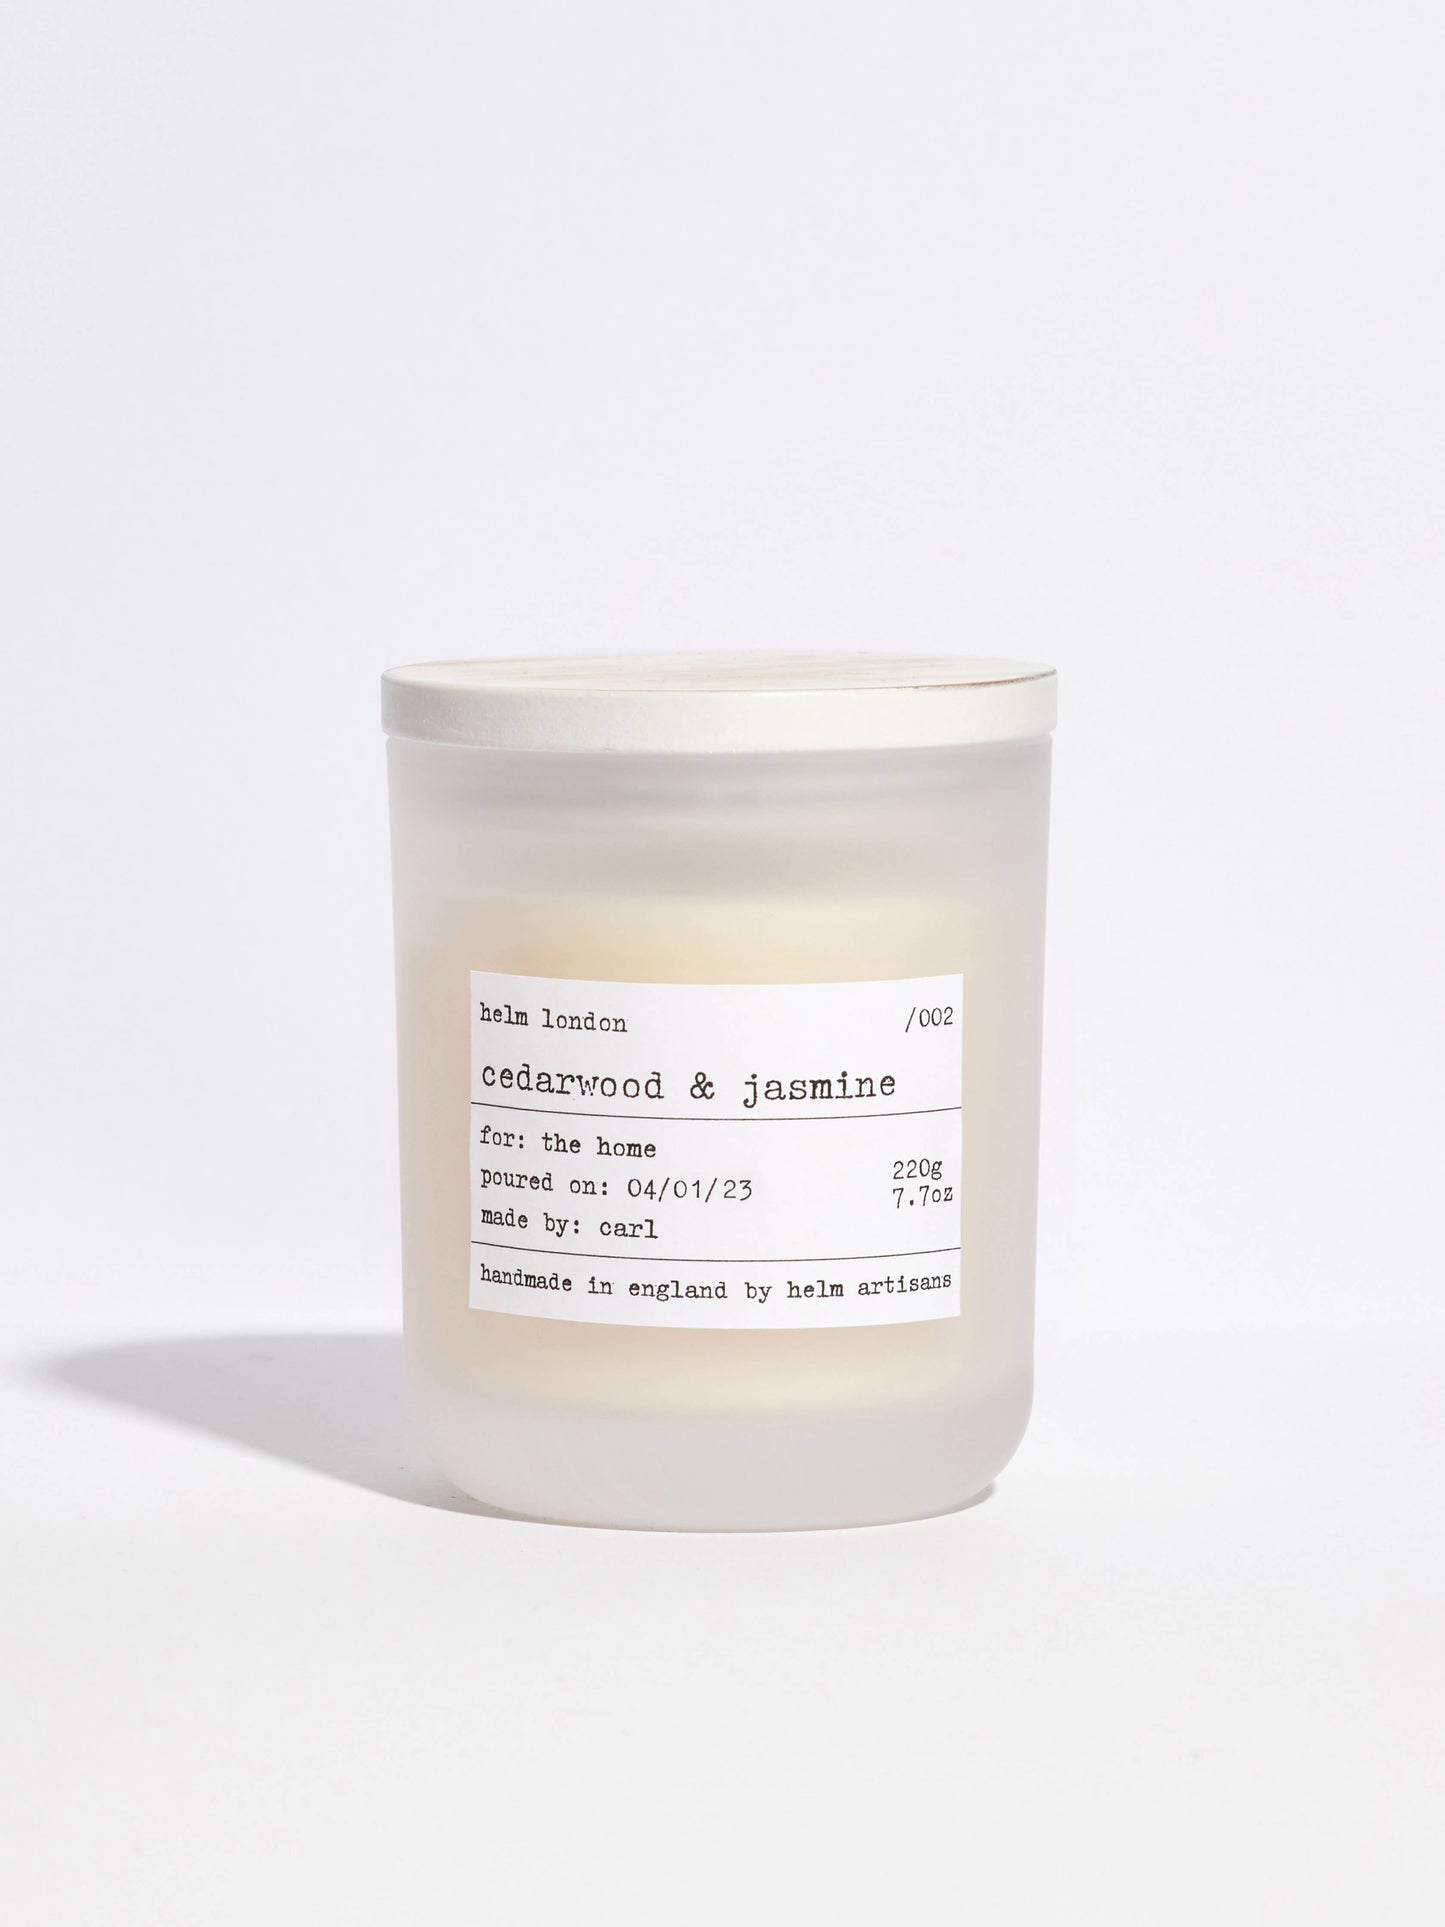 Helm London Cedarwood & Jasmine Soy Wax Candle at Joetie Home Fragrance. Luxury Handmade Apothecary Soy Candles